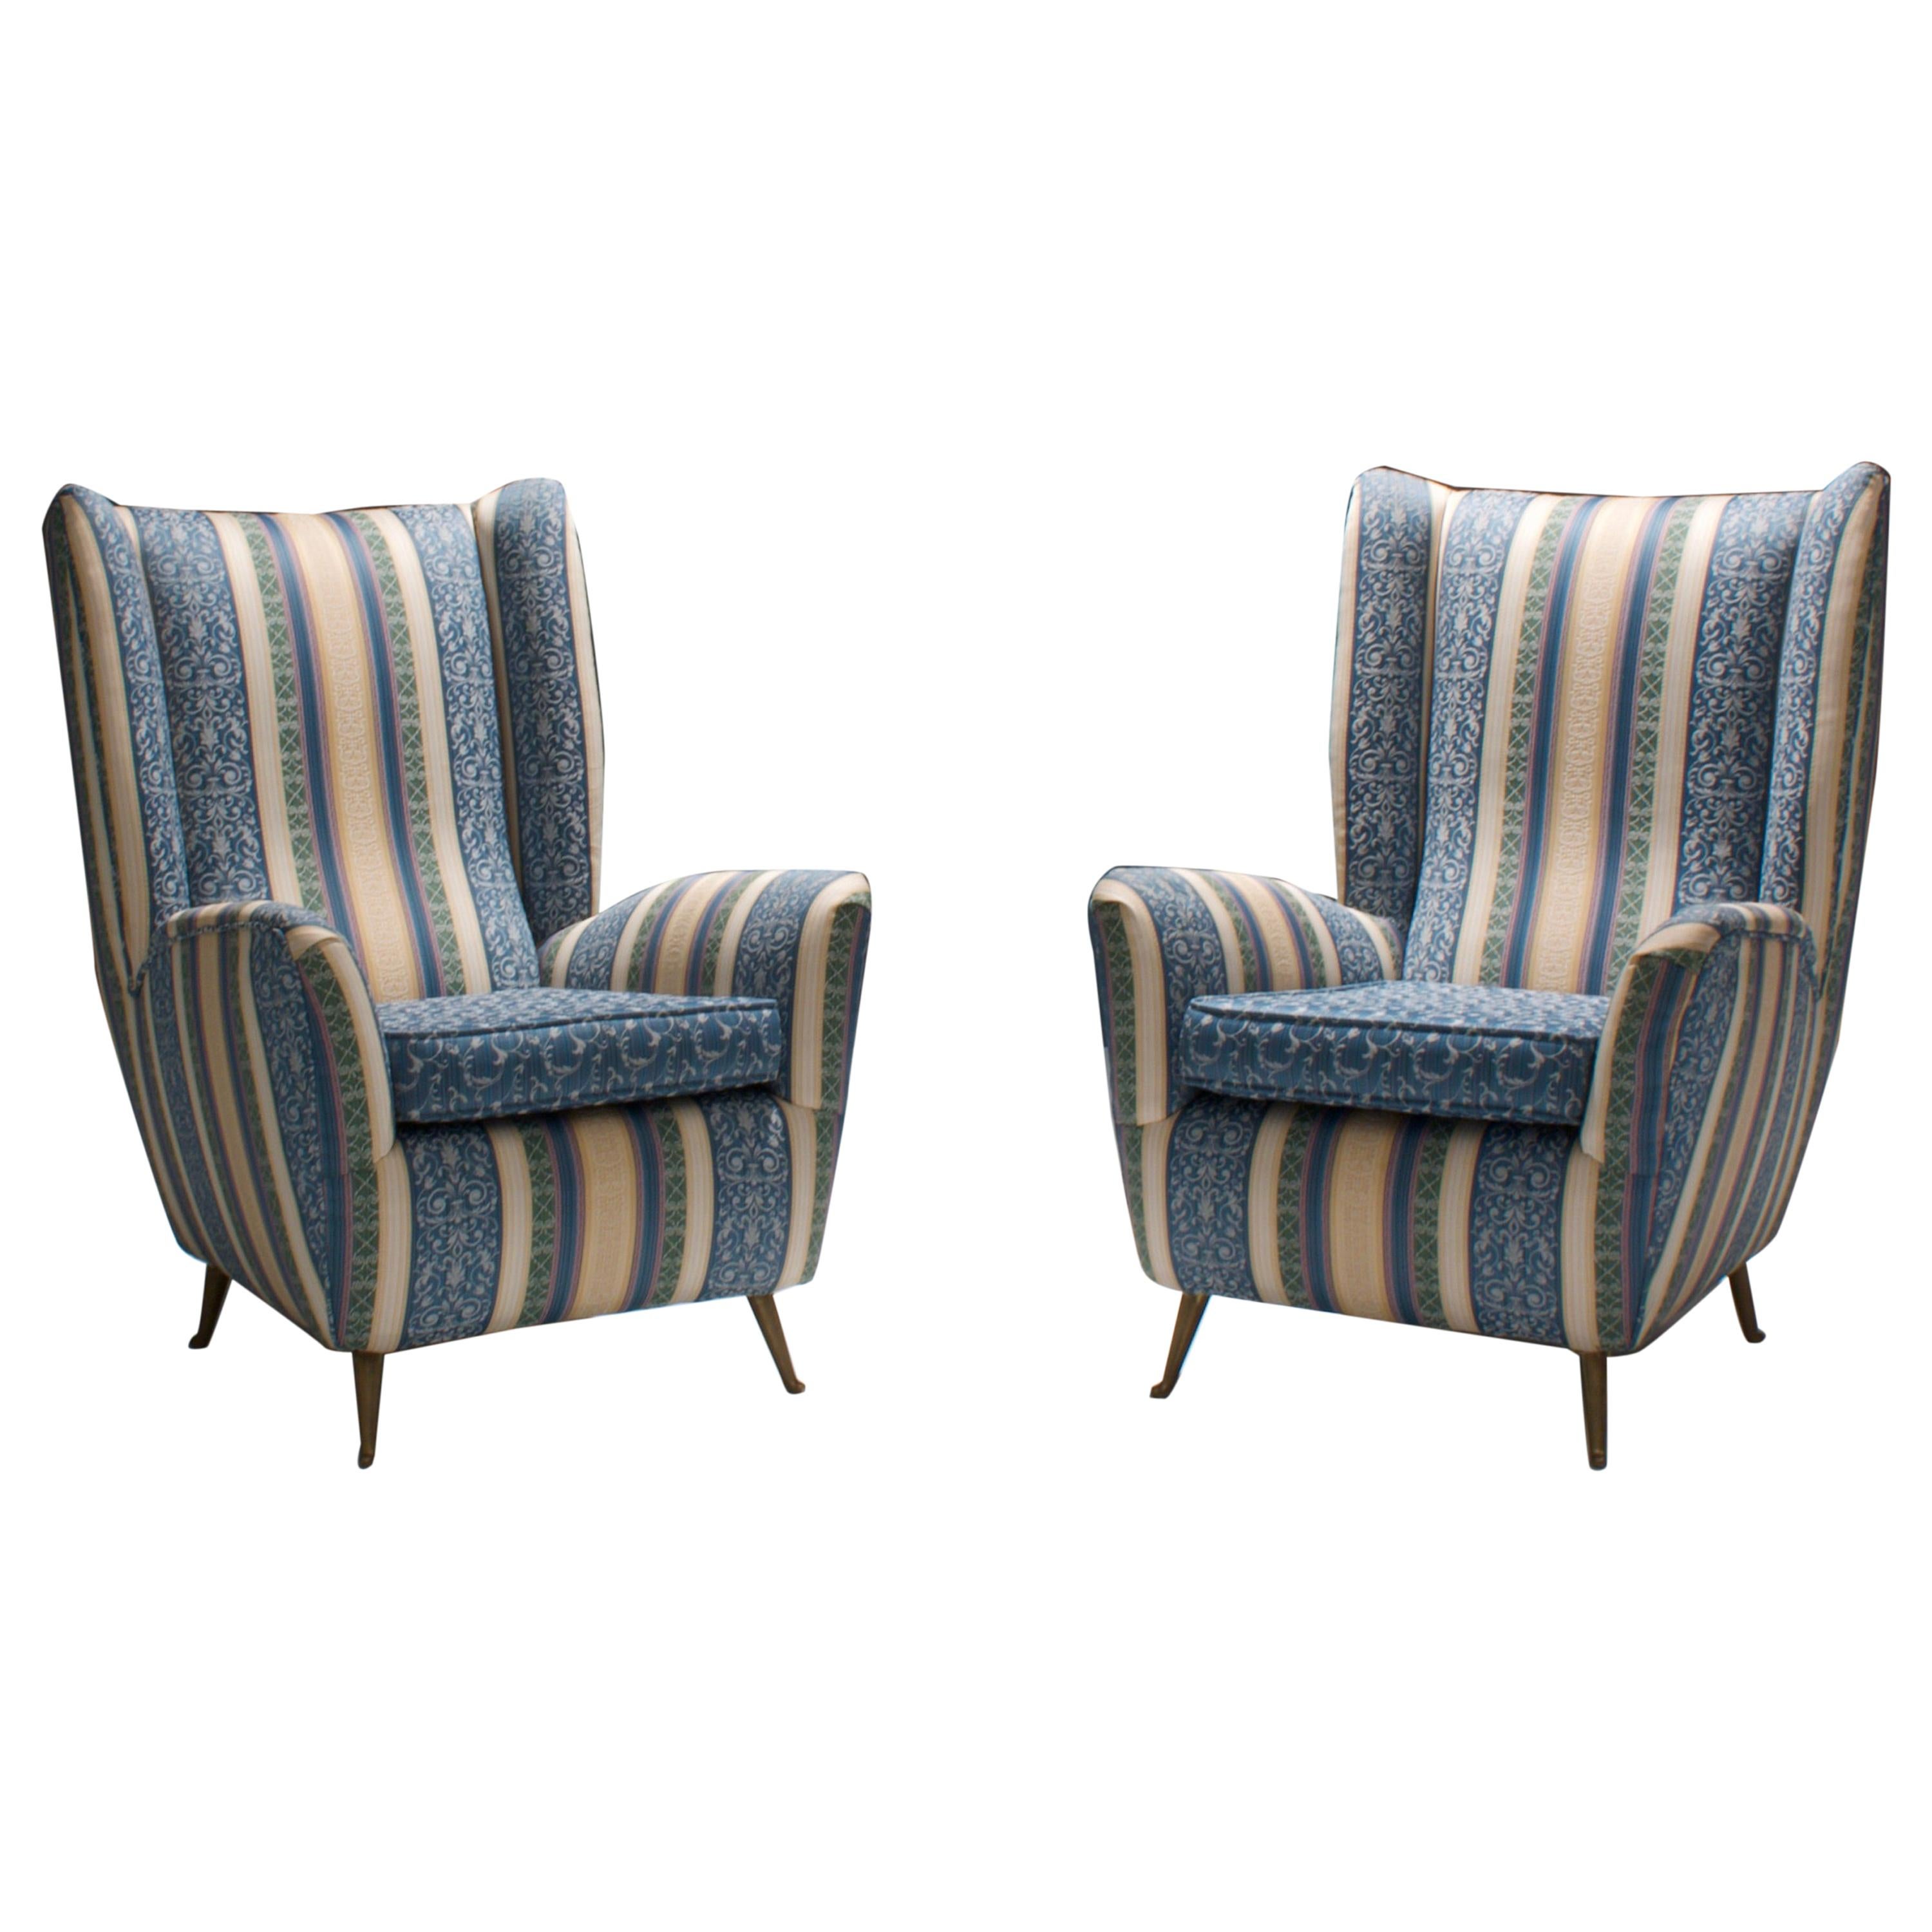 Set of Two Lounge Chairs by I.S.A. in Silk Upholstery and Brass, Italy, 1950s For Sale